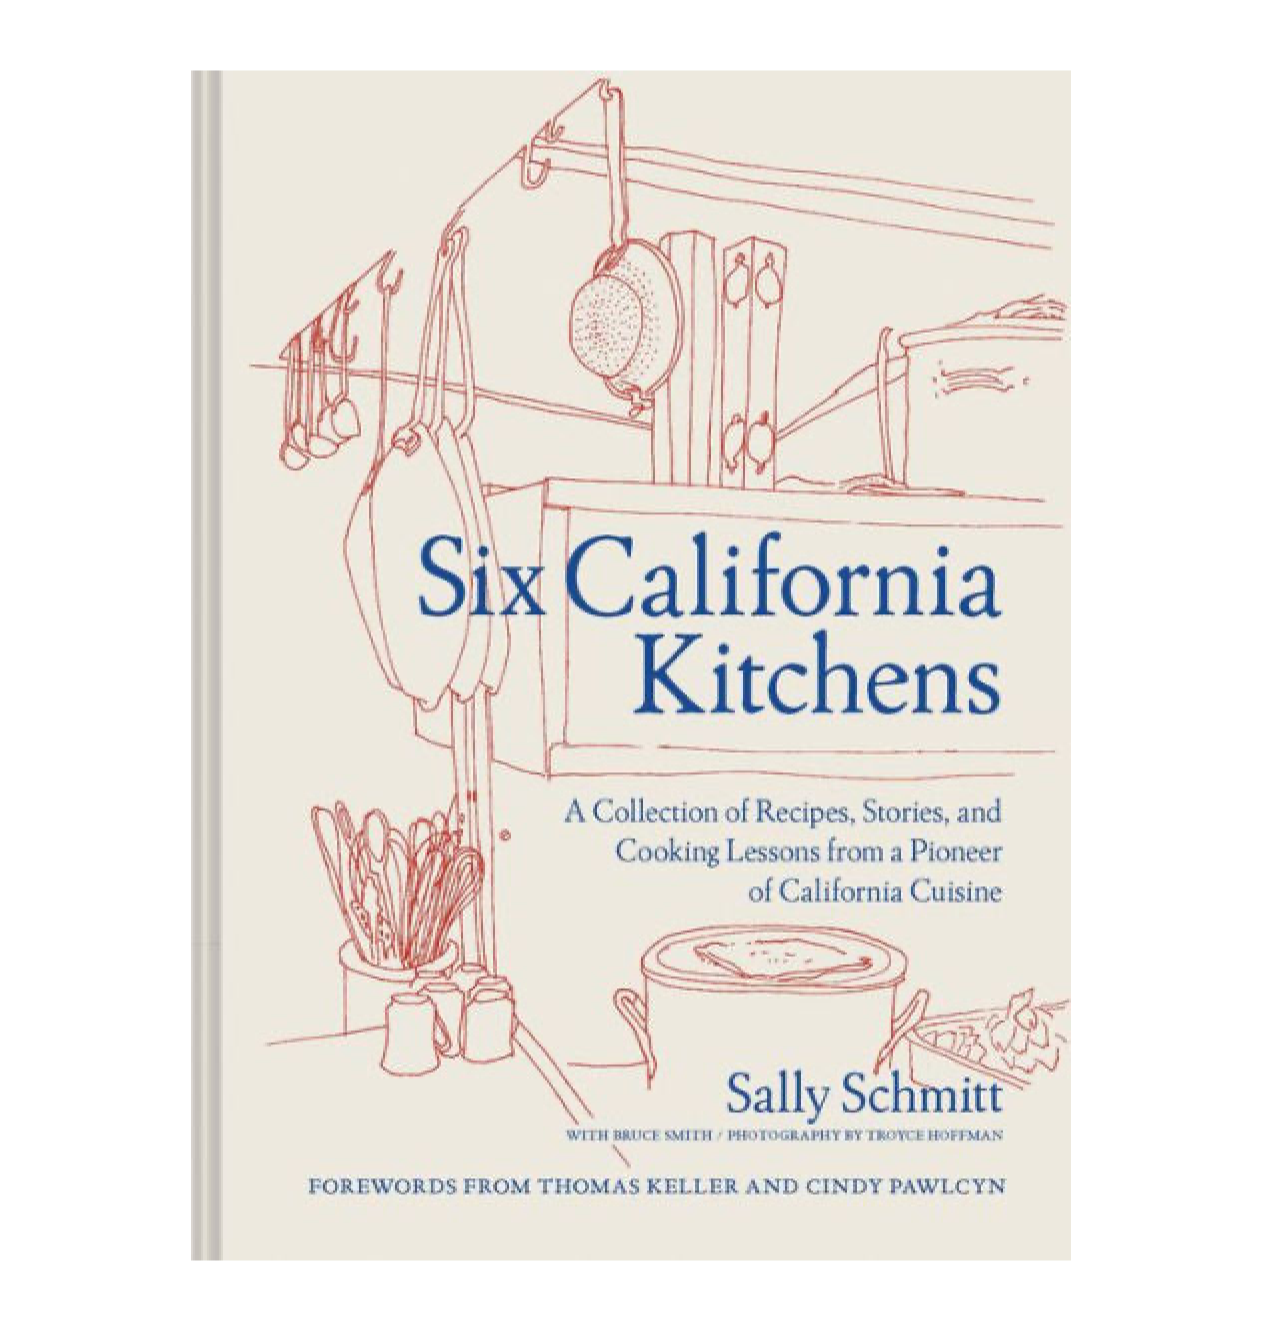 Six California Kitchens: A Collection of Recipes, Stories, and Cooking Lessons from a Pioneer of California Cuisine